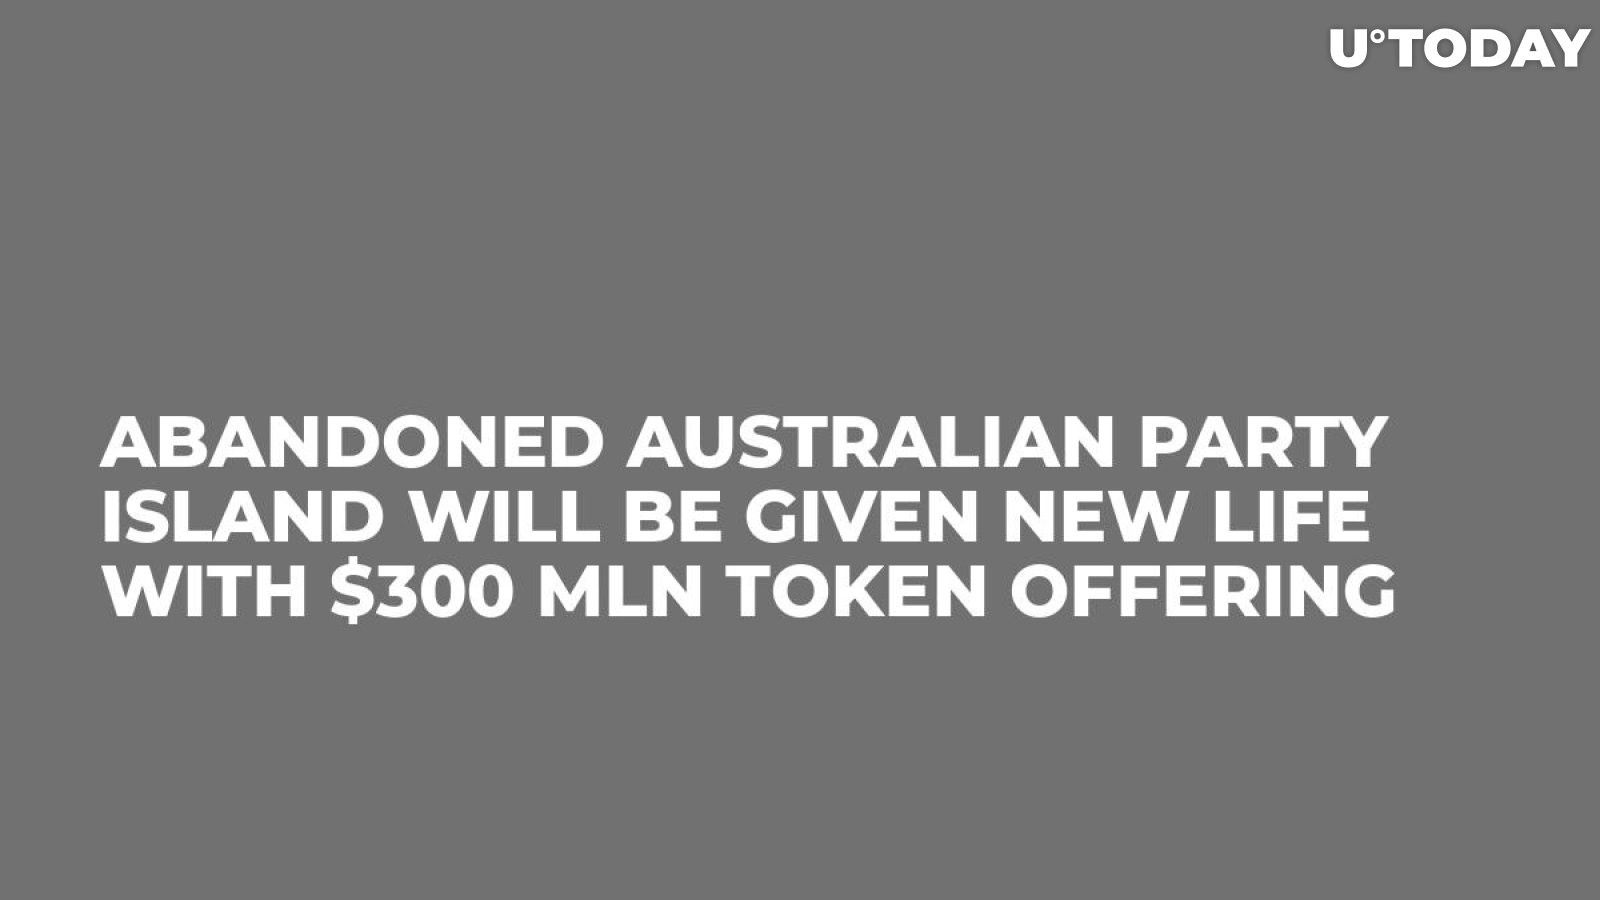 Abandoned Australian Party Island Will Be Given New Life With $300 Mln Token Offering